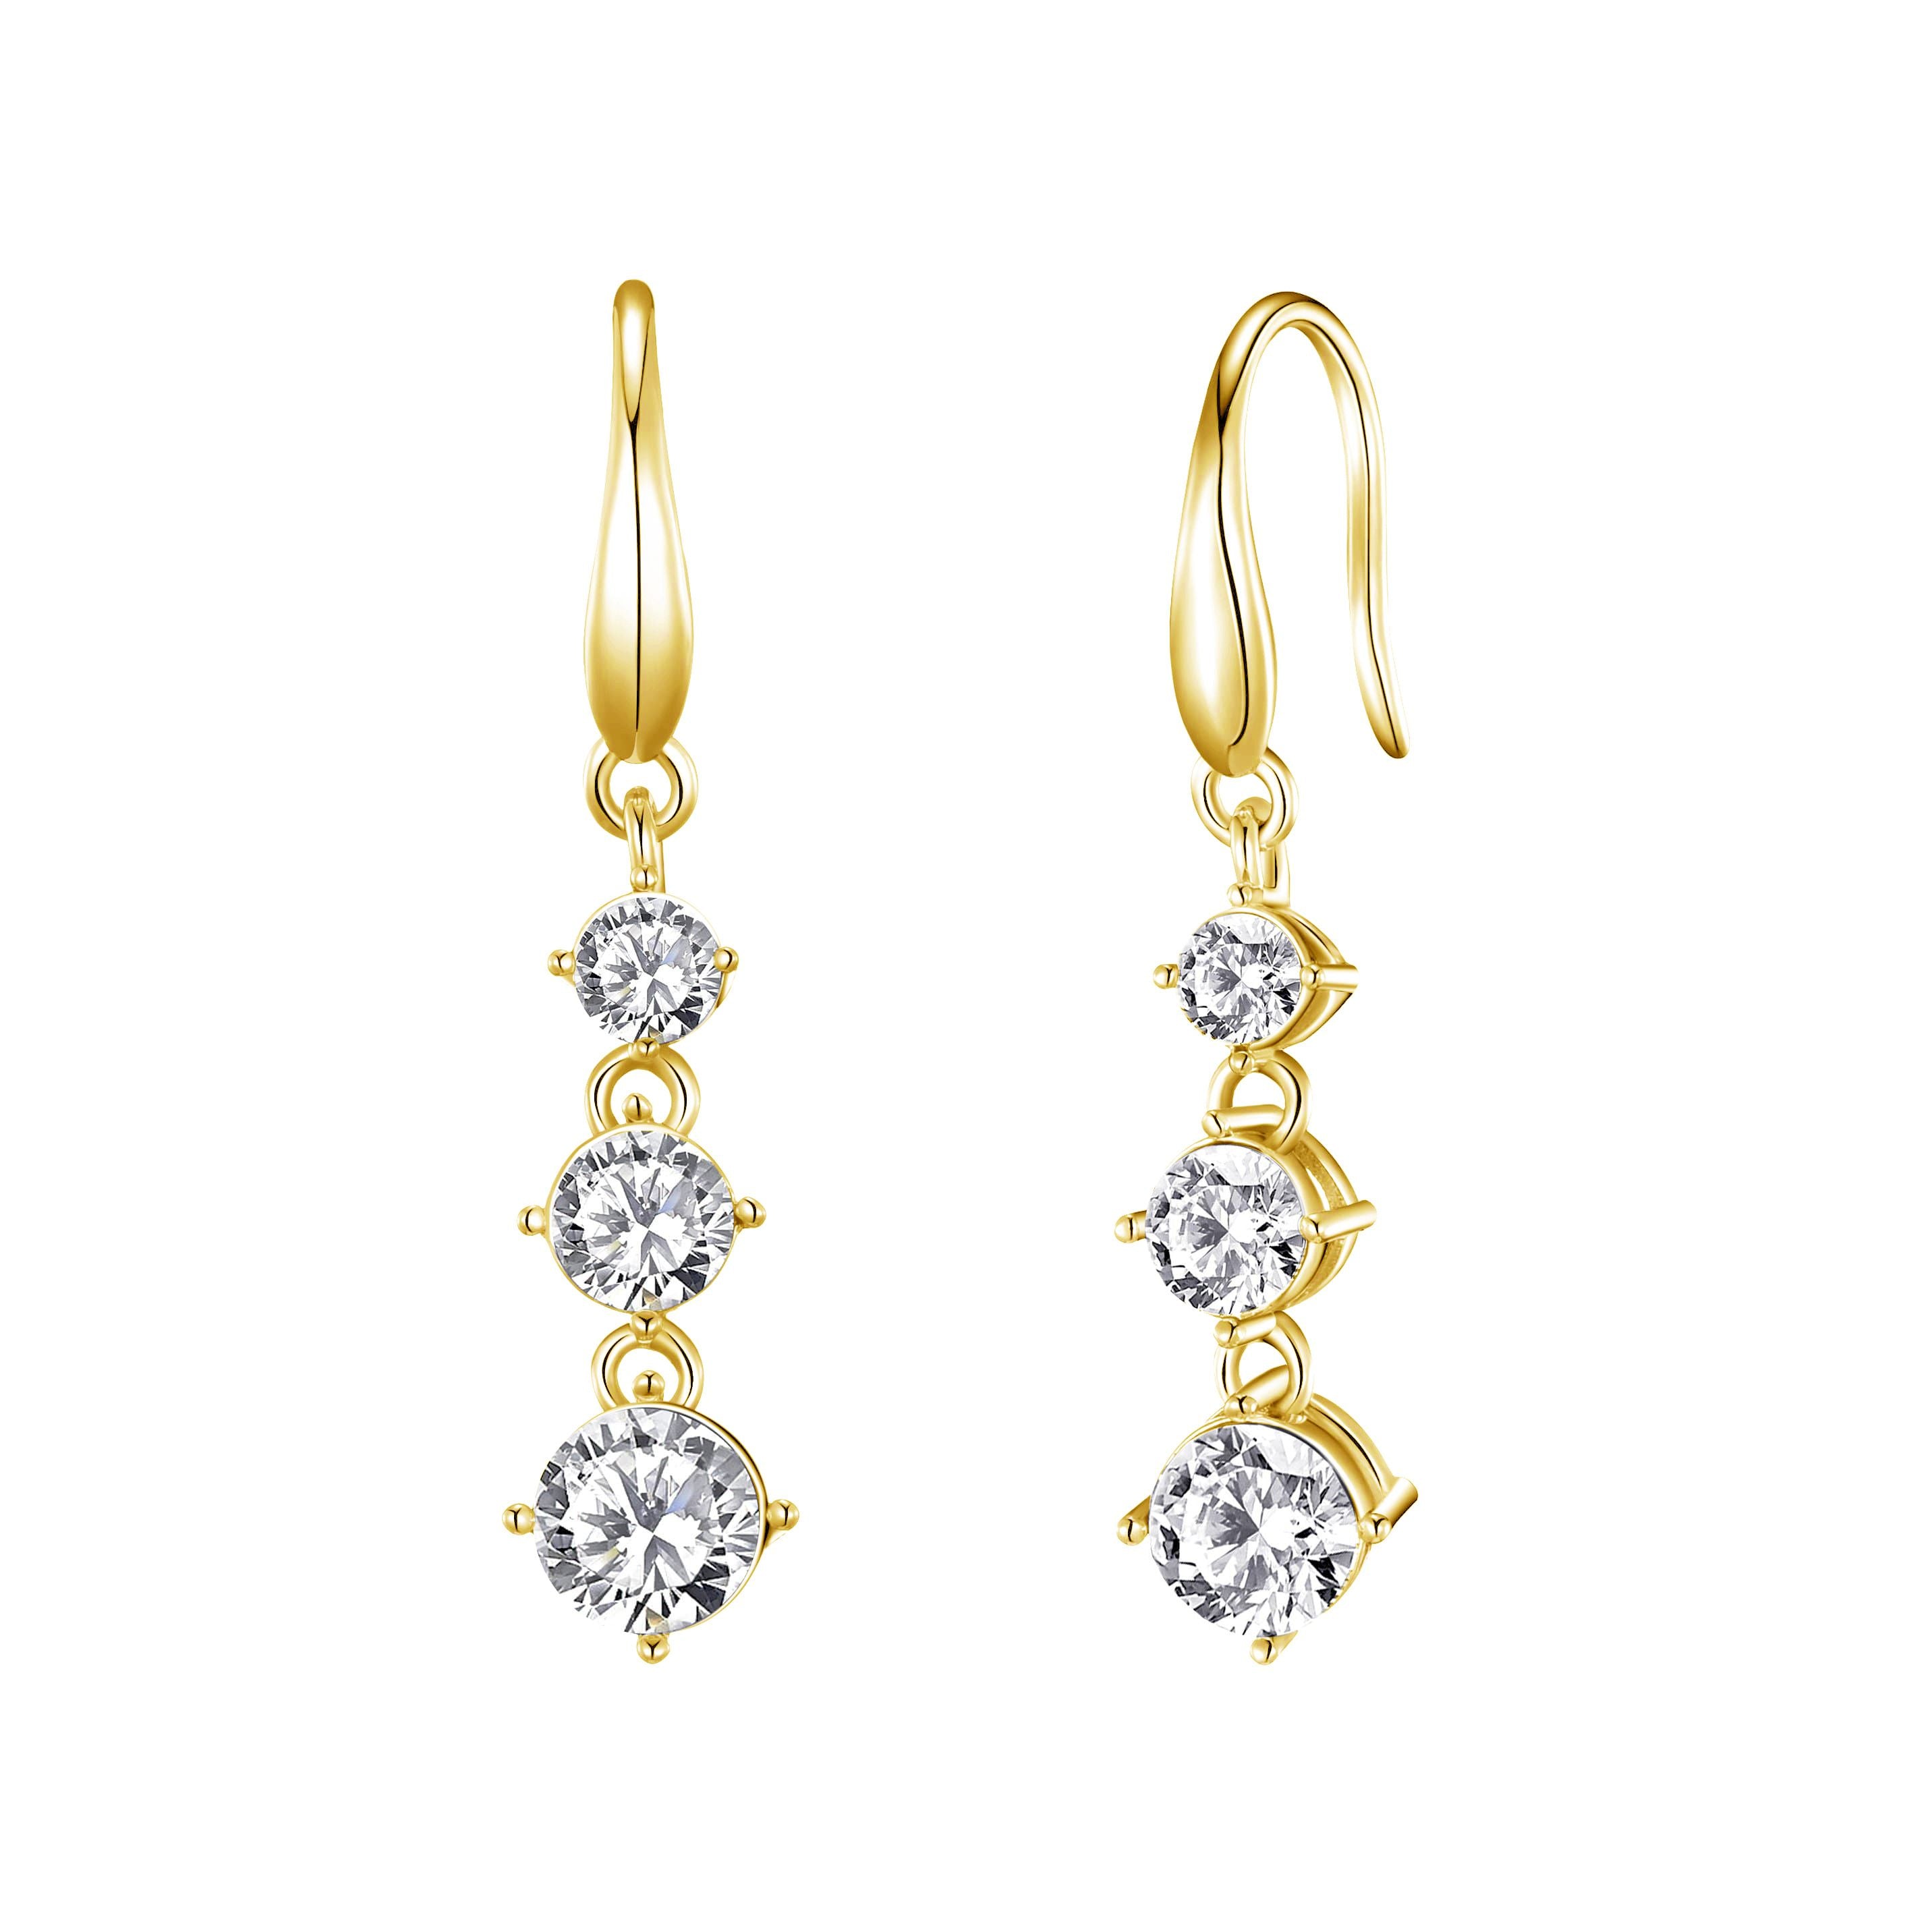 Gold Plated Graduated Drop Earrings Created with Zircondia® Crystals by Philip Jones Jewellery